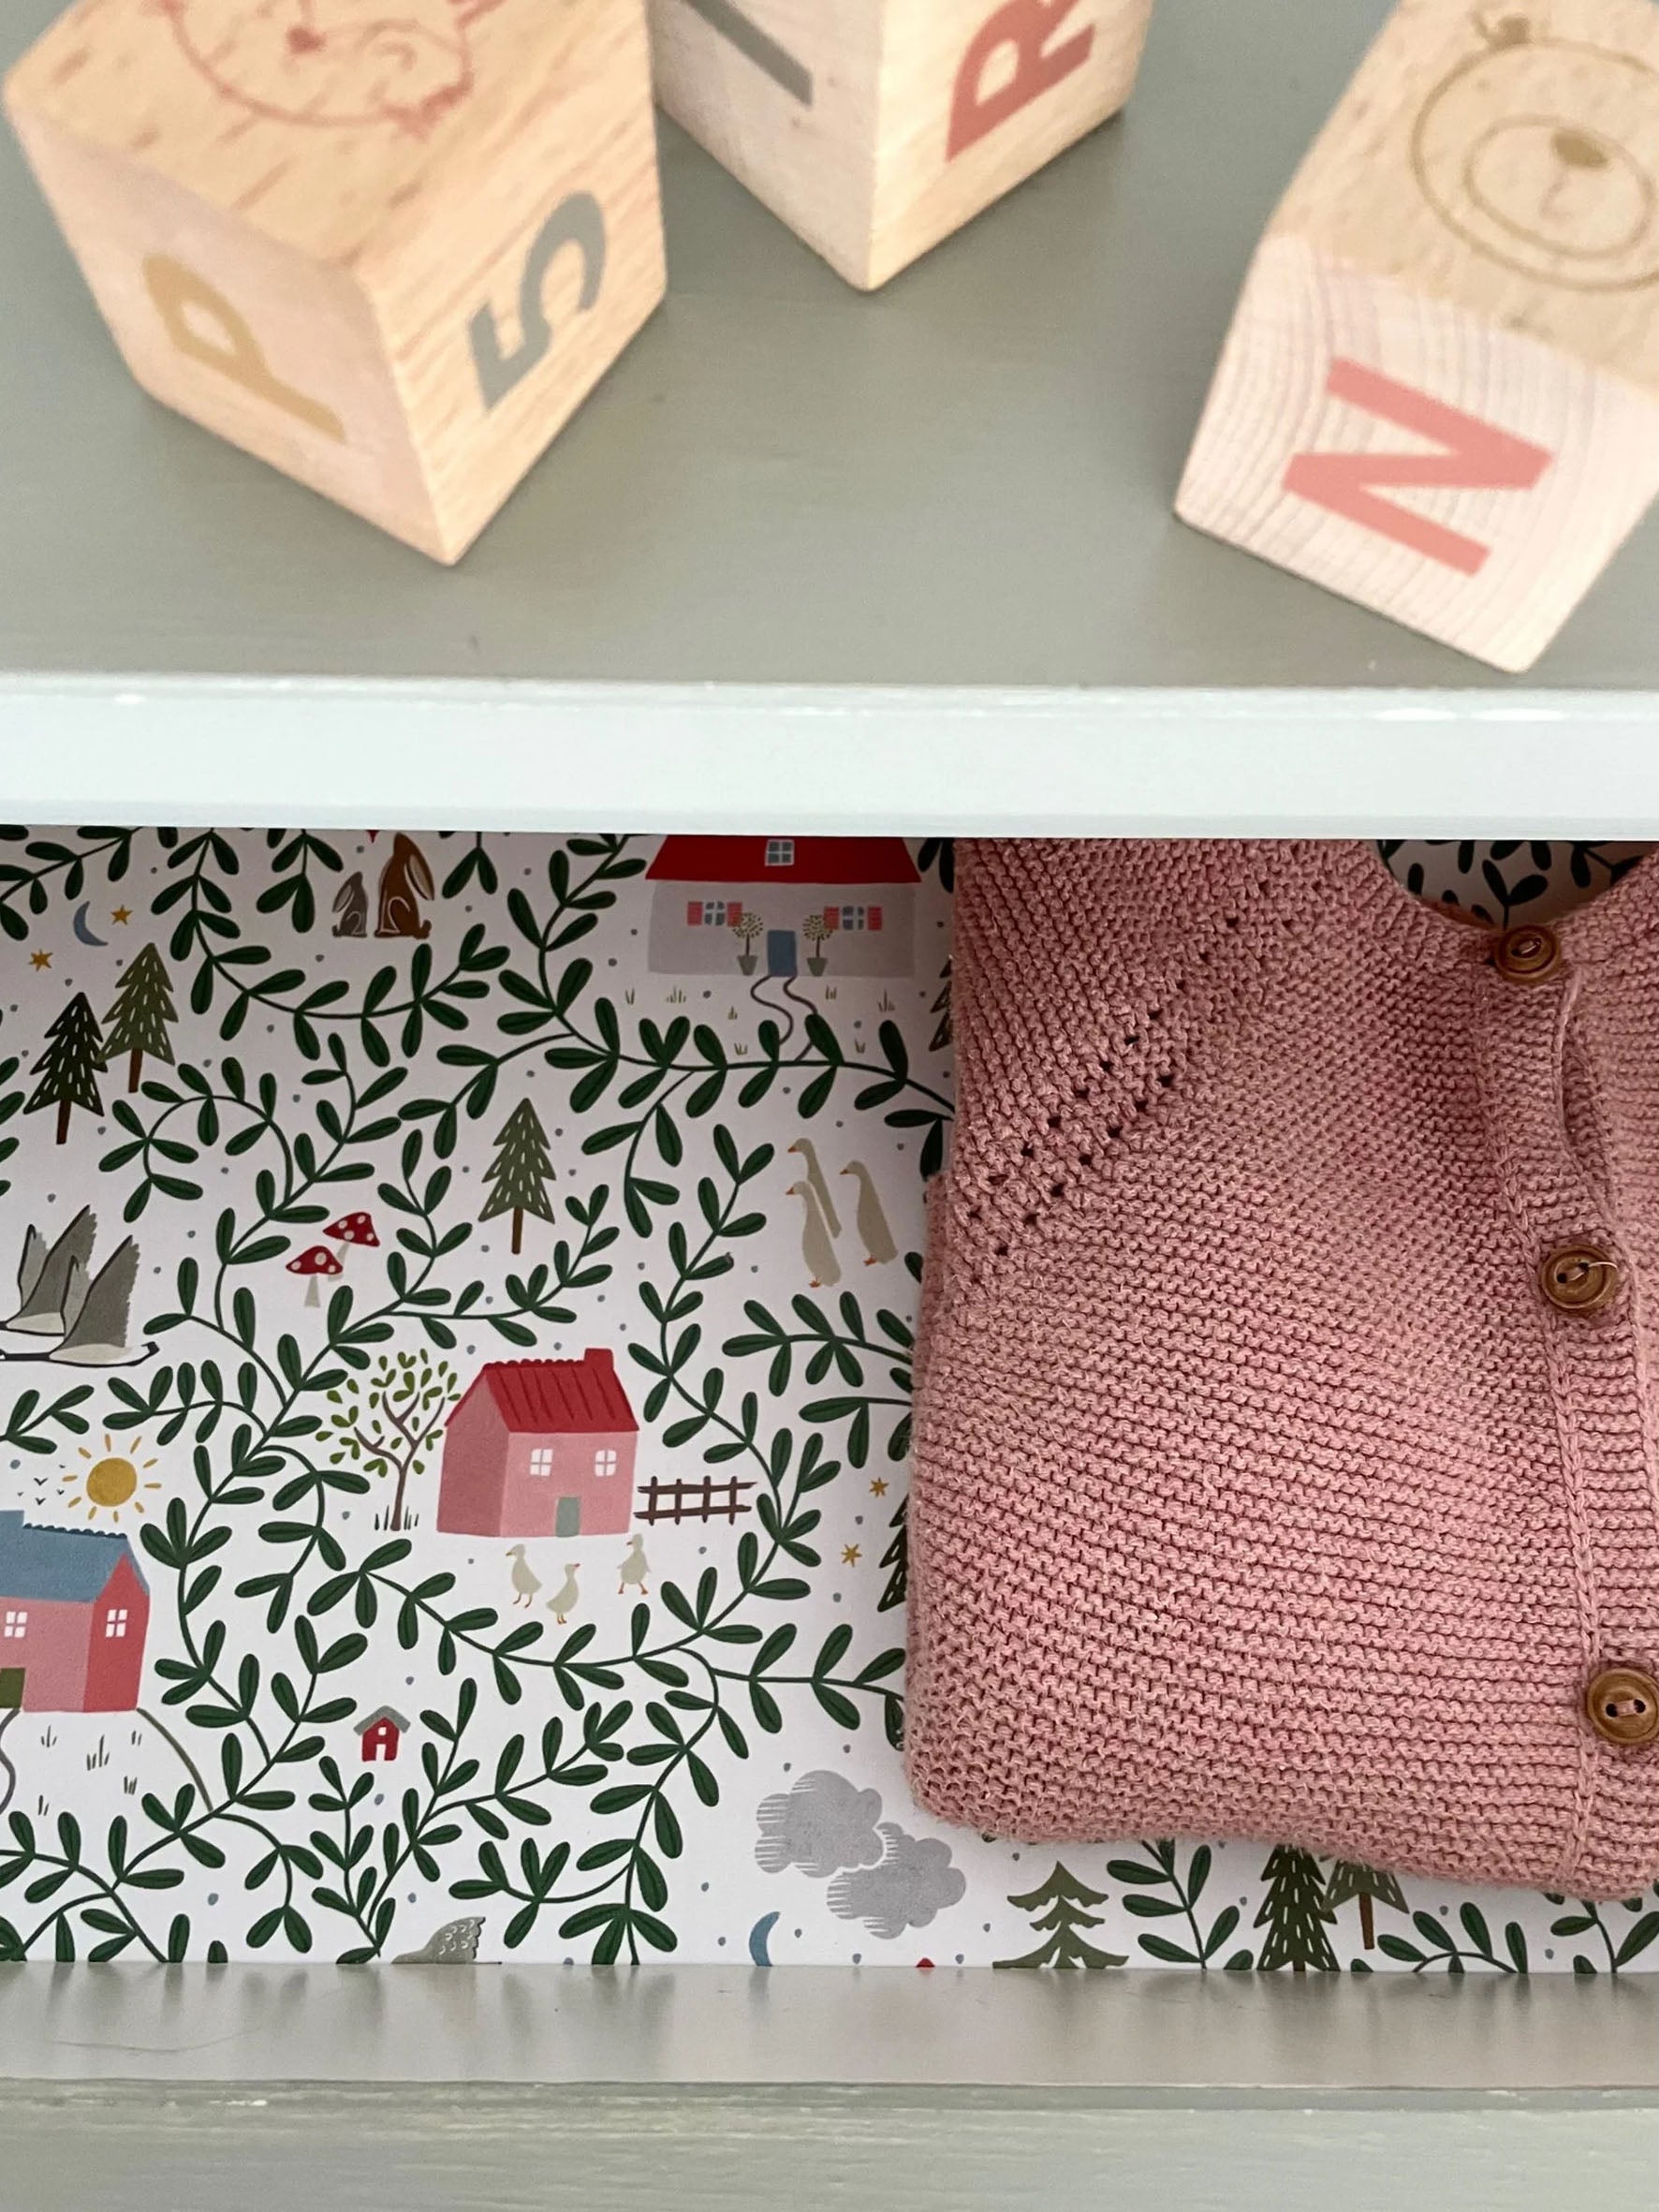 Childrens chest of drawers lined with english country cottages wallpaper, with building blocks and pink baby girls cardigan